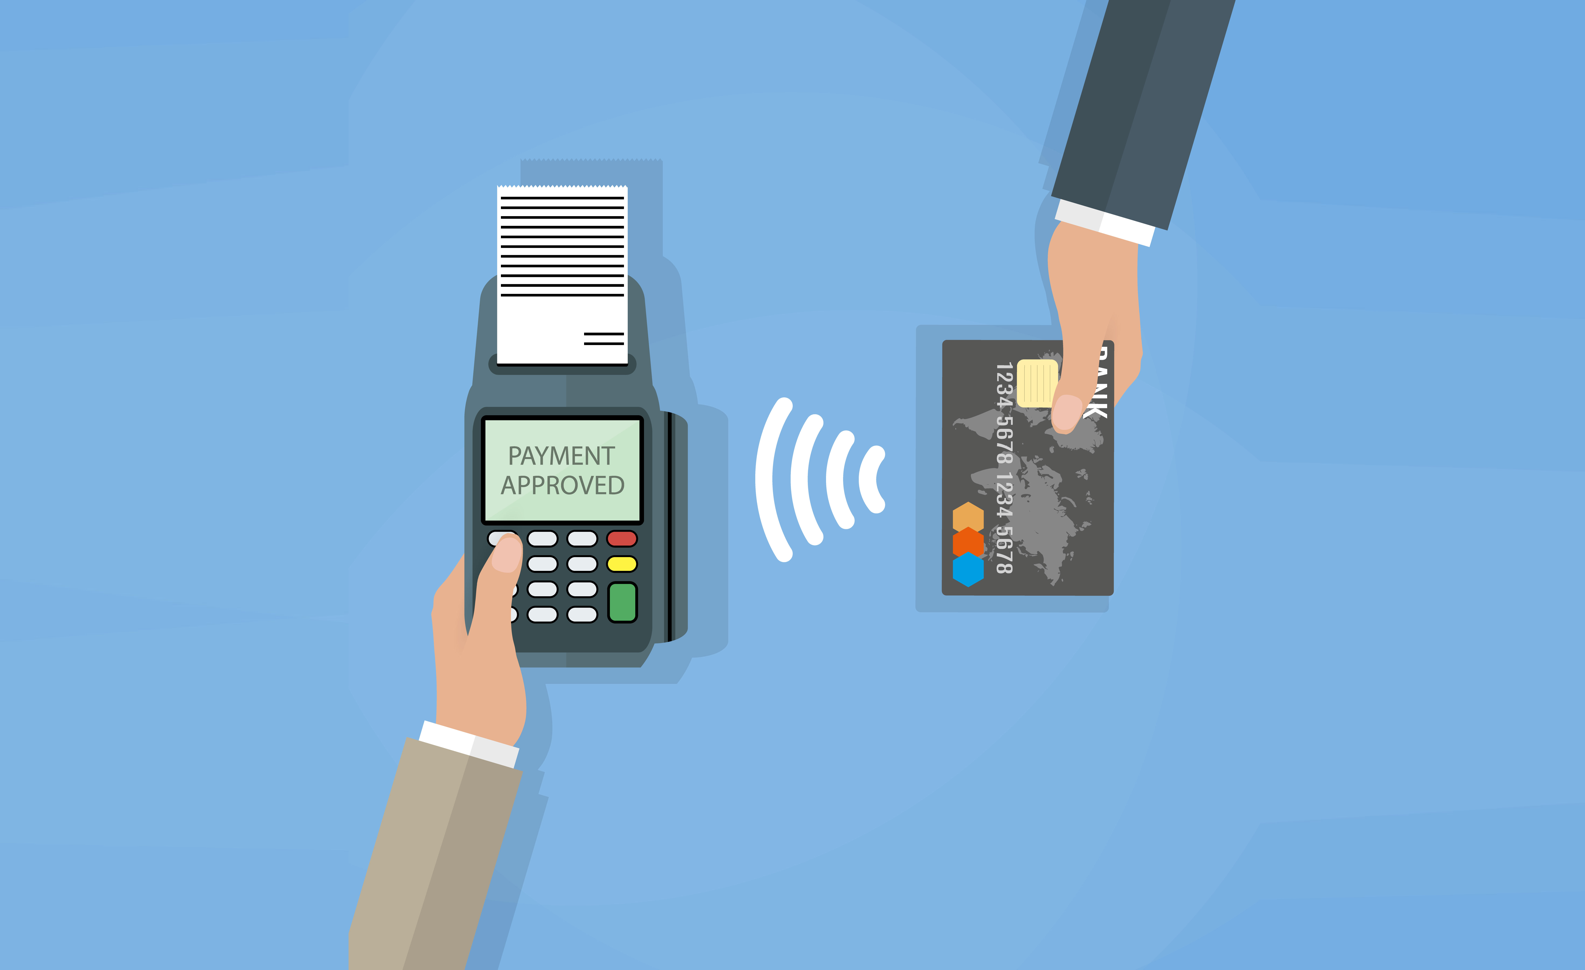 Payment Processing Trends for New Technology to Enhance Security